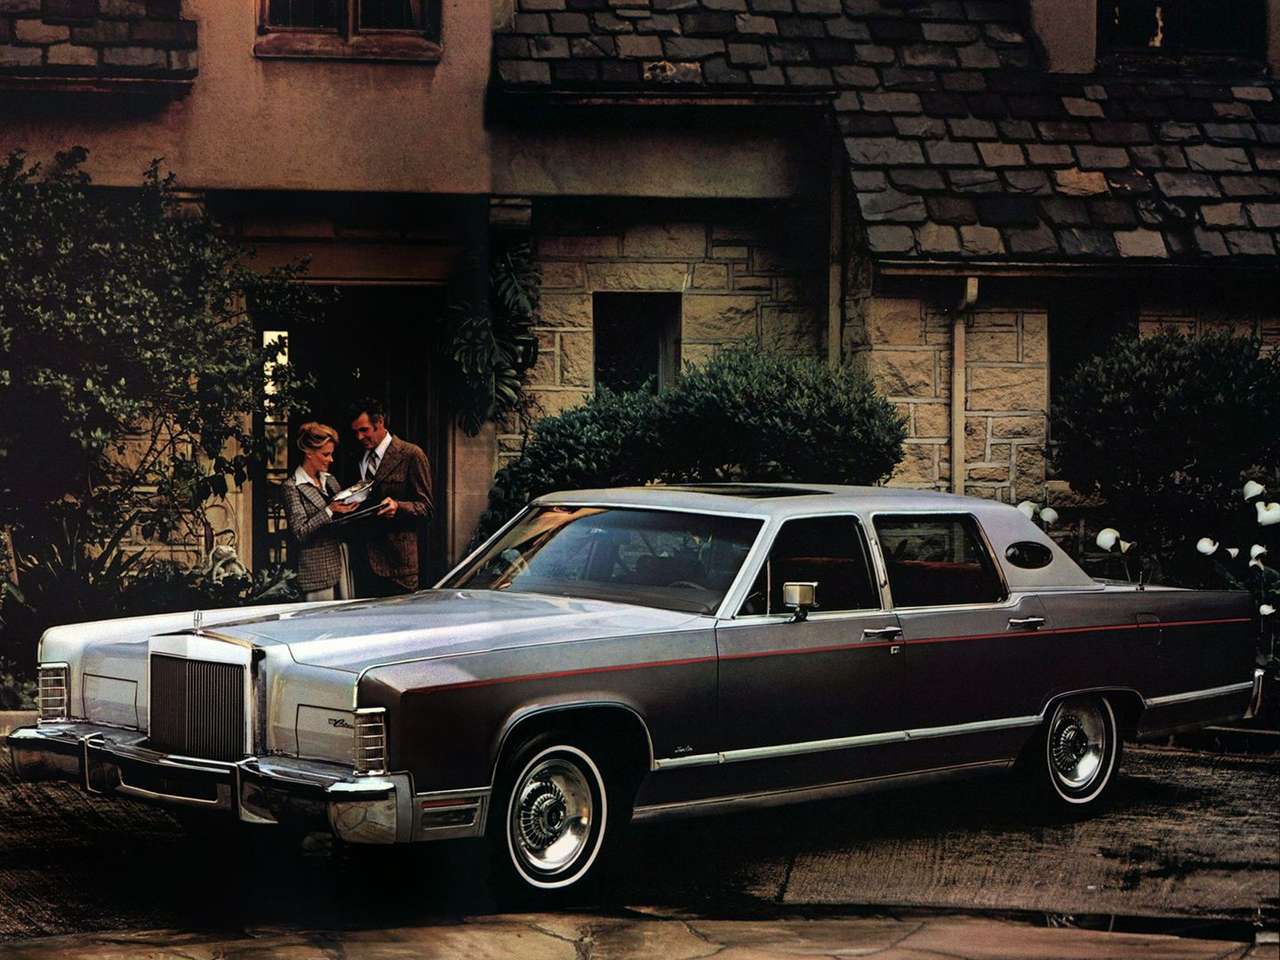 1978 Lincoln Continental Stadtauto. Online-Puzzle